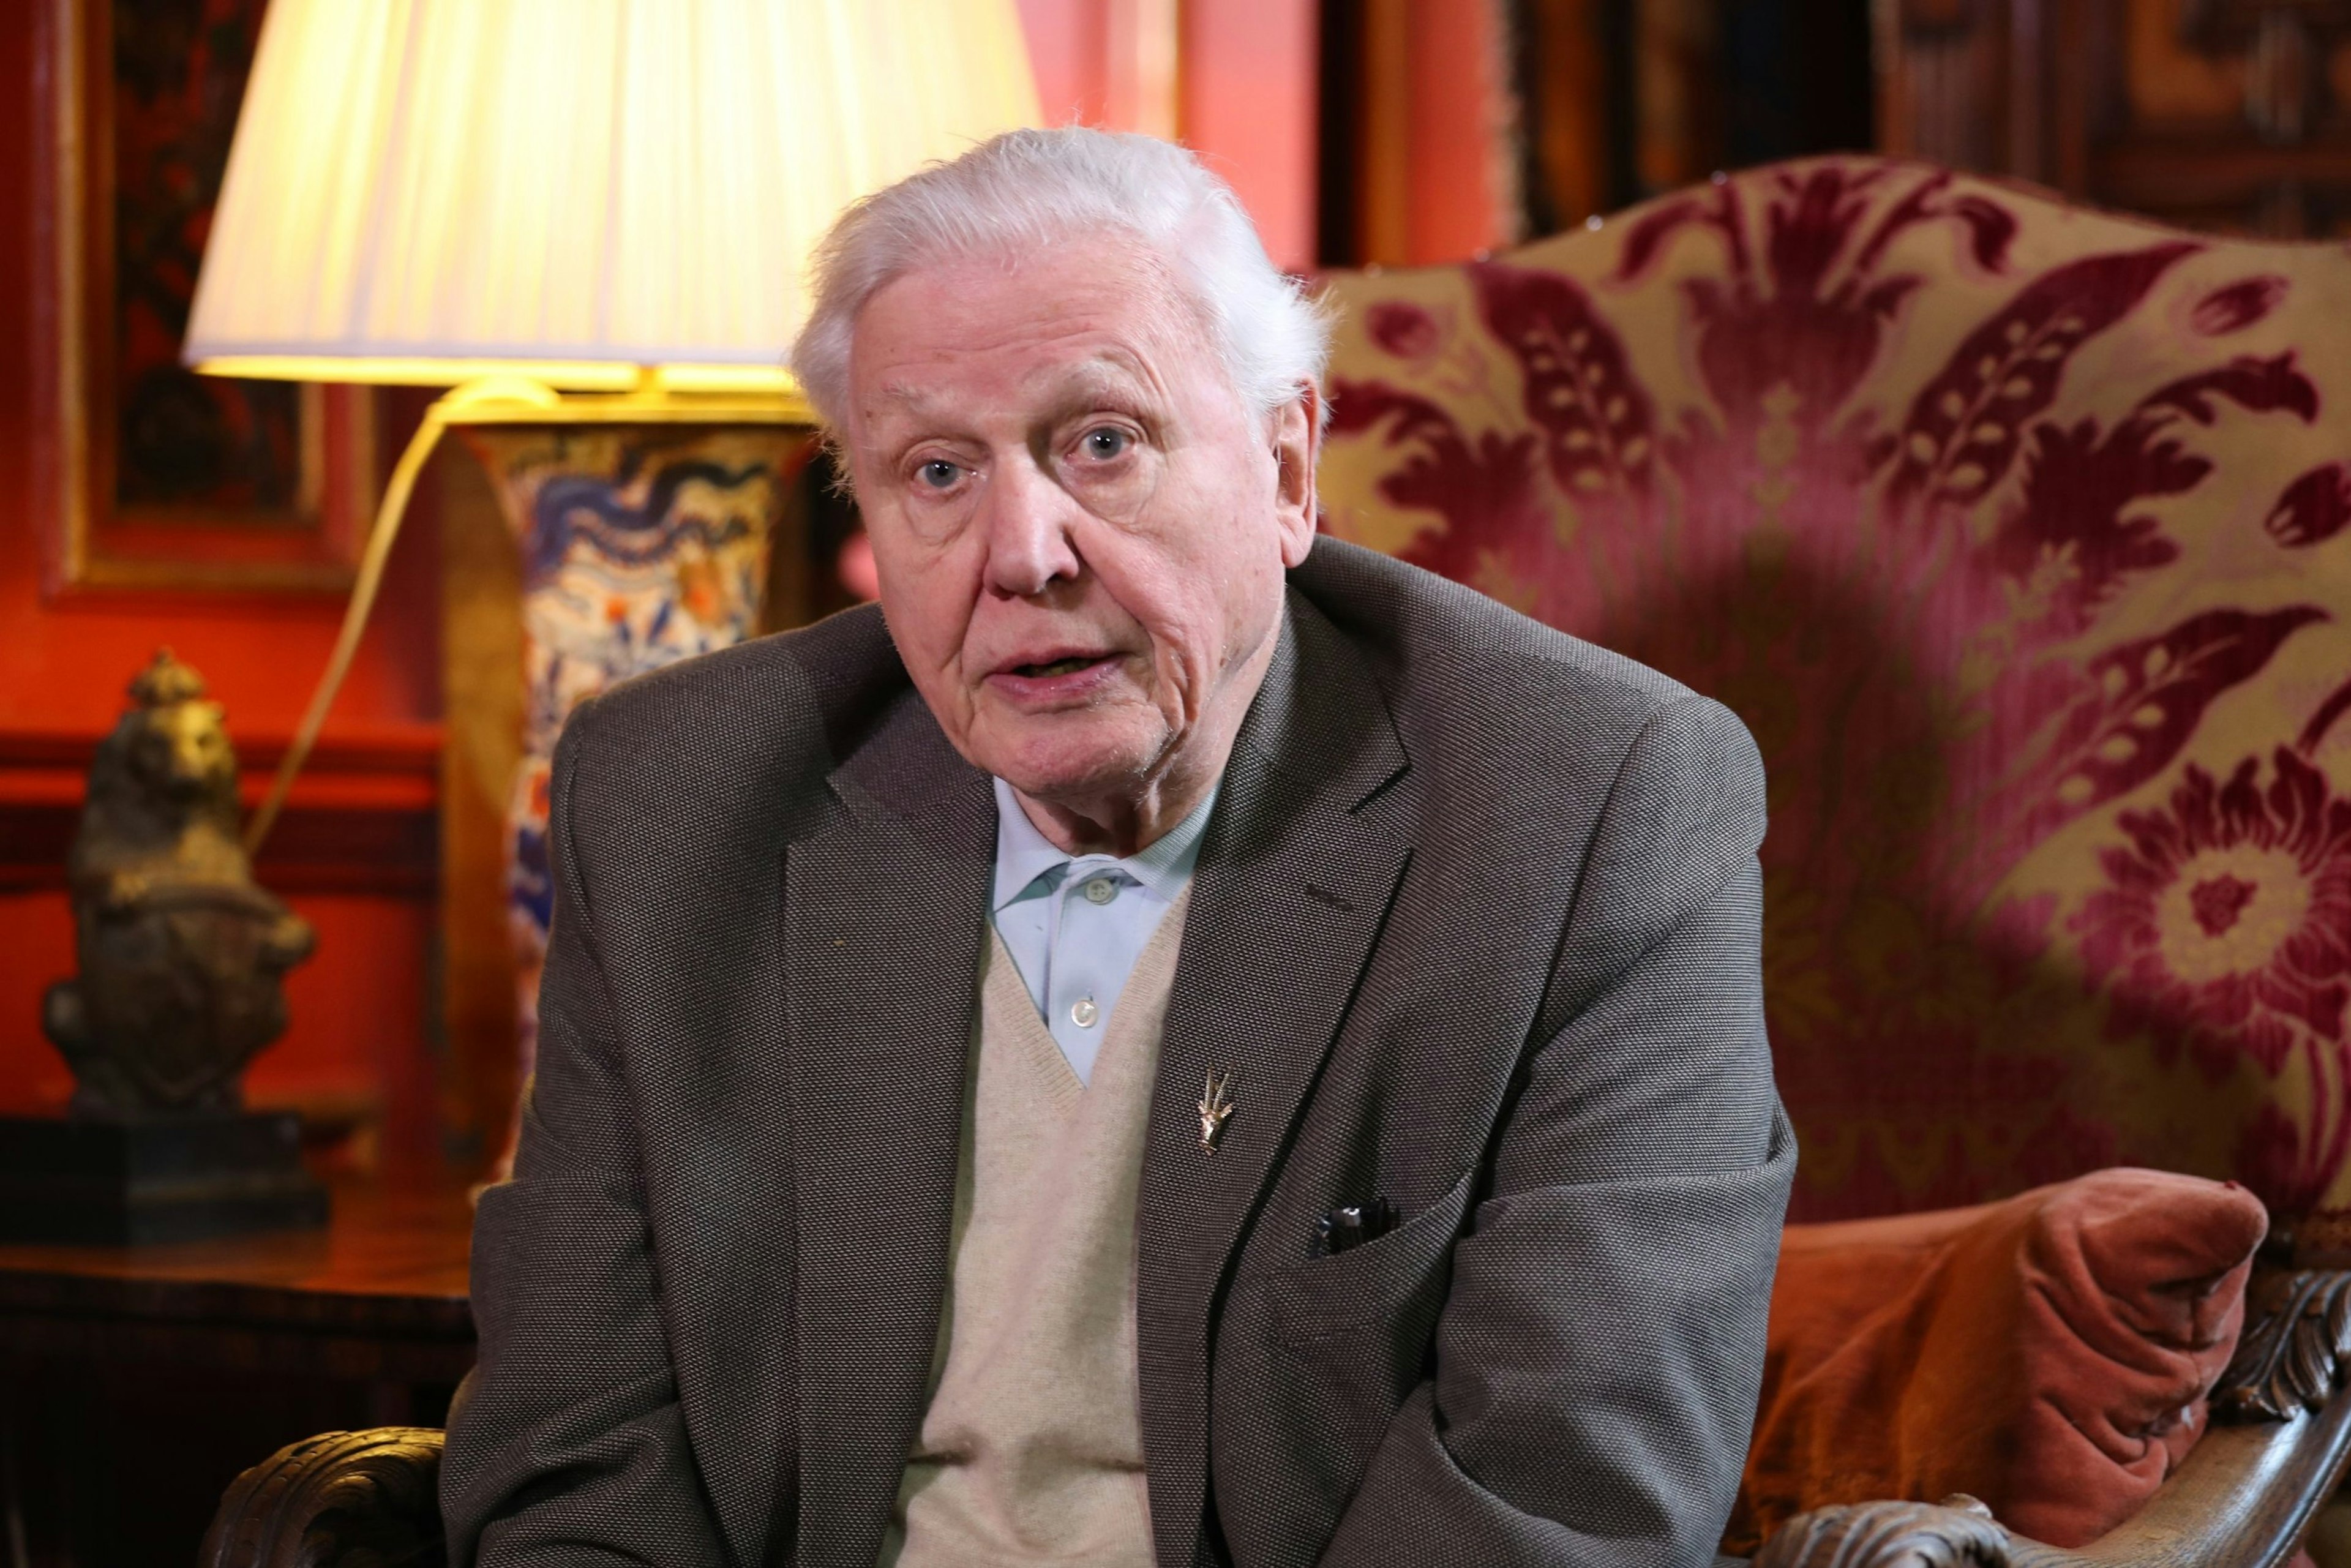 Planet Earth will team David Attenborough with composer and rapper Dave - Lonely Planet